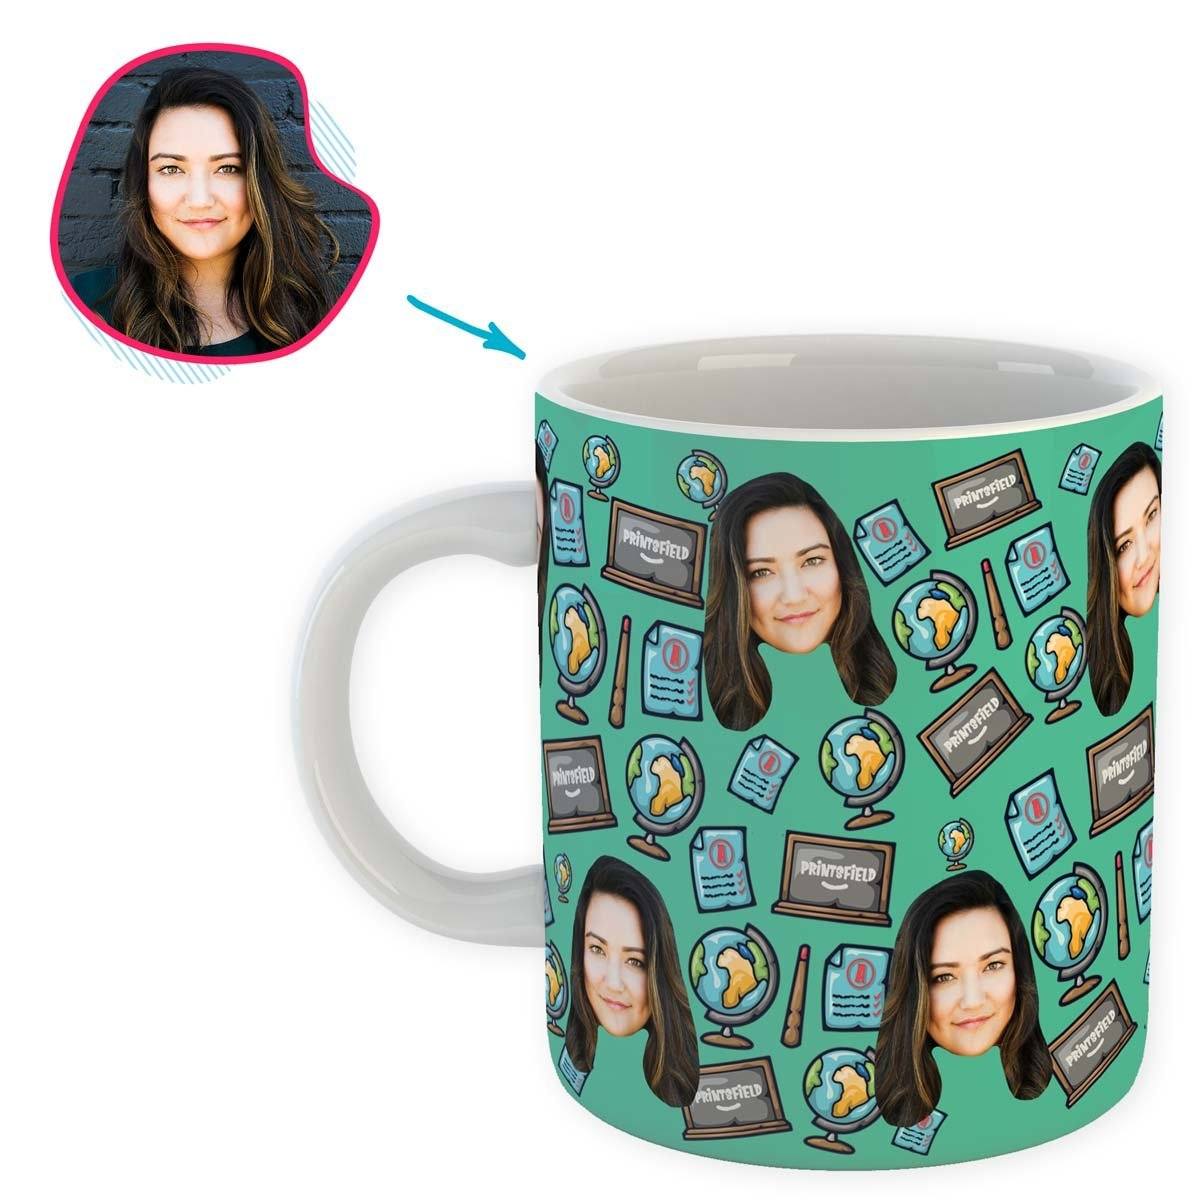 Mint Teacher personalized mug with photo of face printed on it